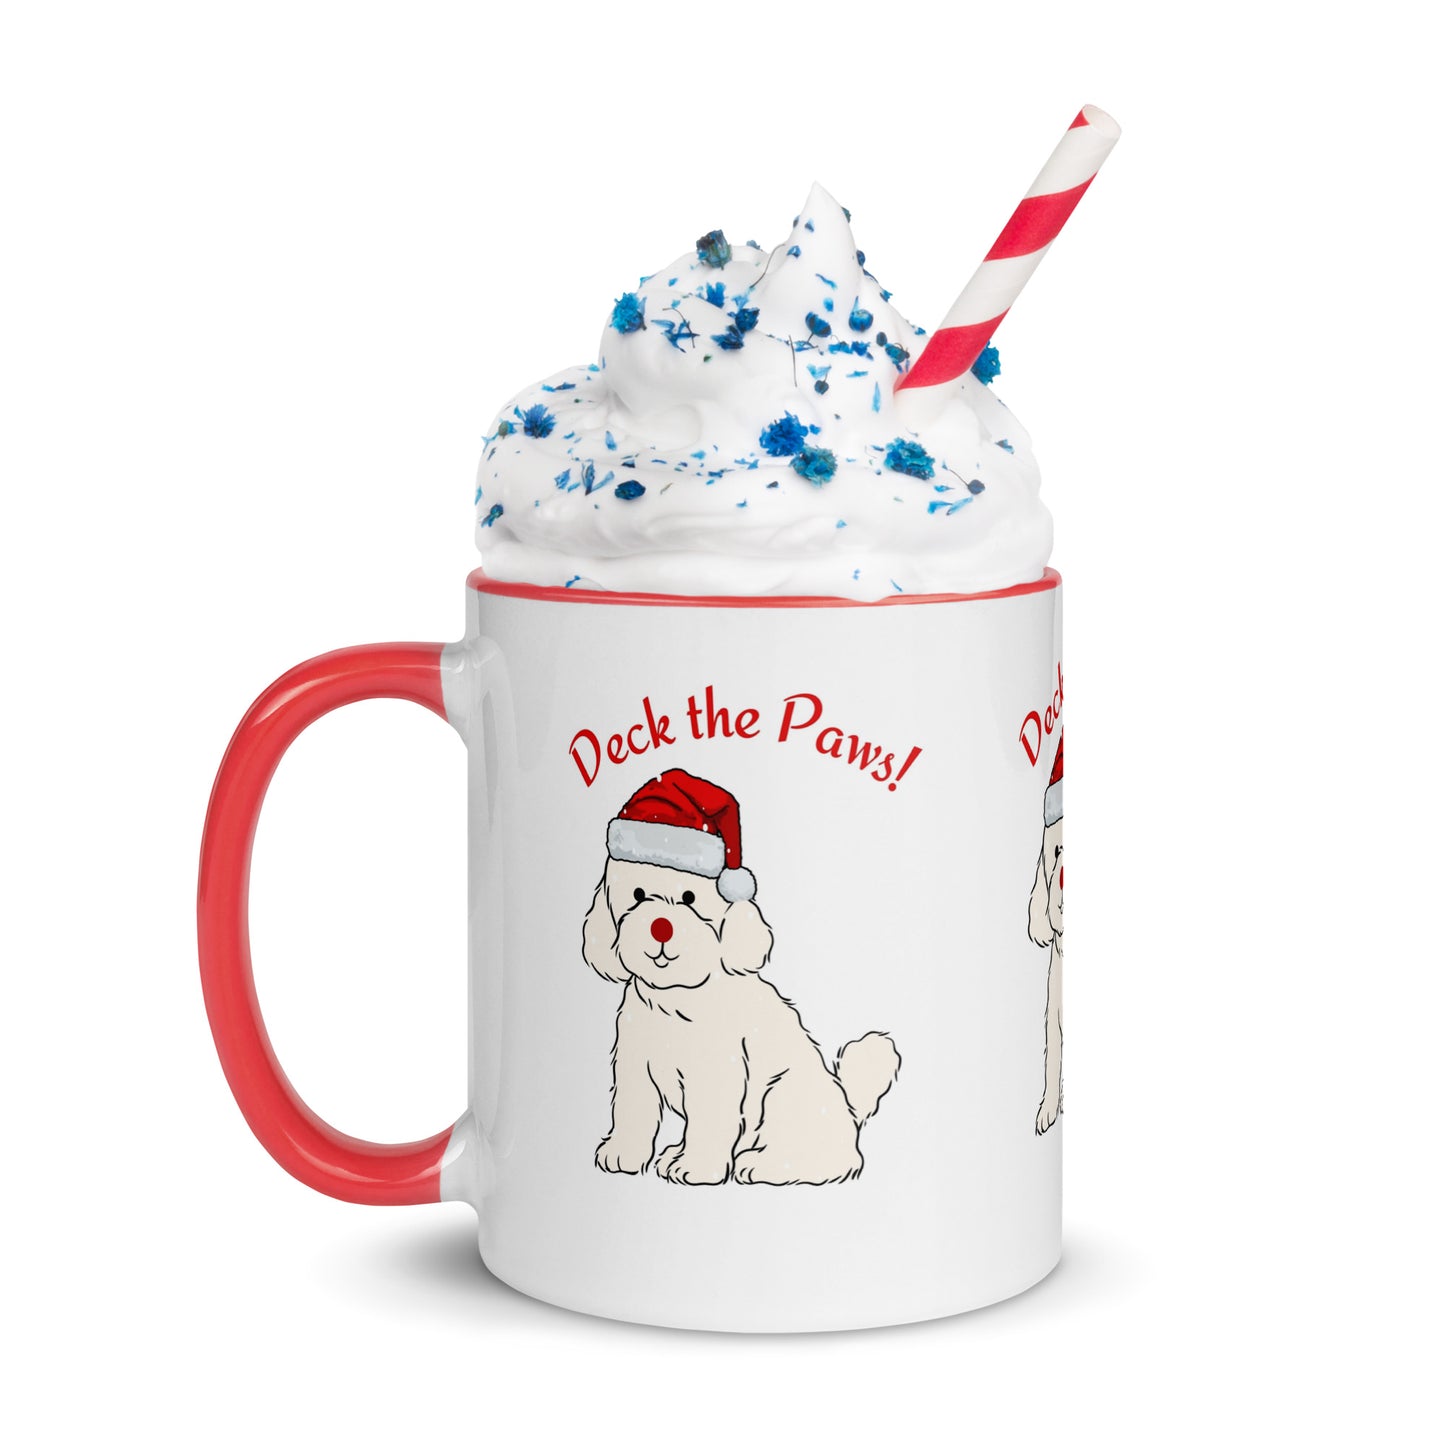 Festive Hot Cocoa Mug for Inspiring Holiday Flavors. Turn your hot cocoa into a festive treat with our Christmas mug. Get inspired to savor the holiday flavors with each sip, creating delightful moments during this special season.